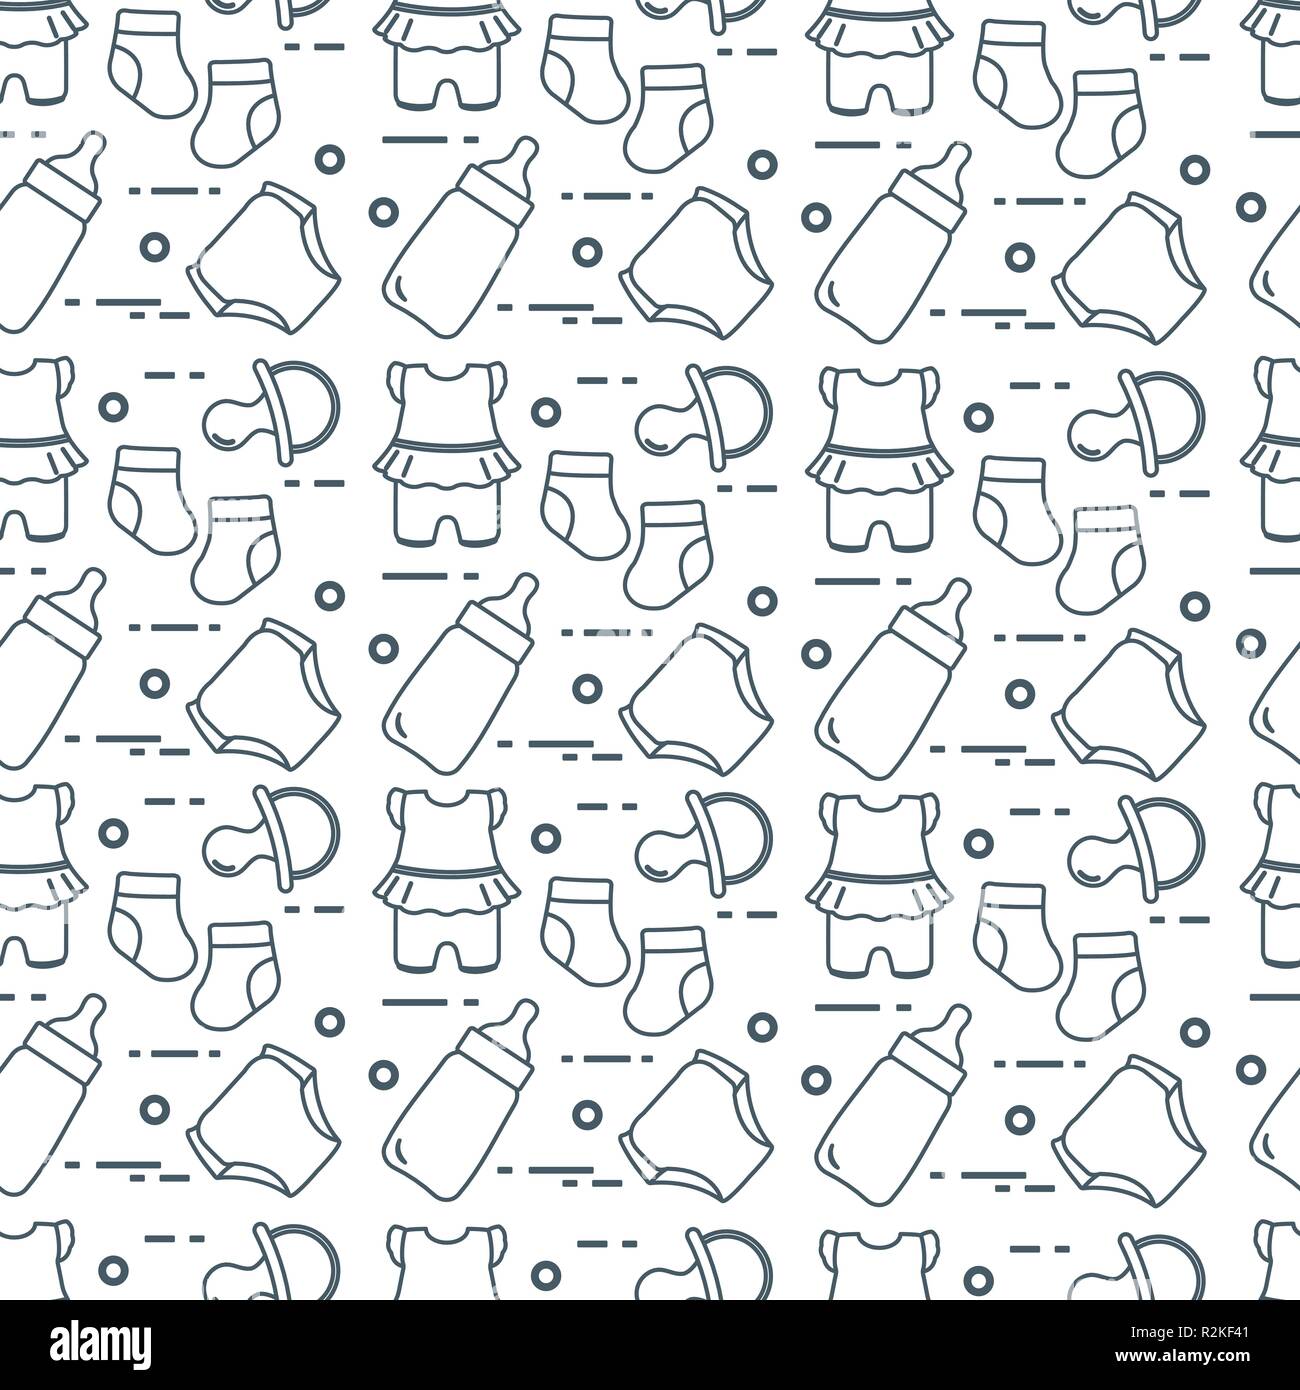 Premium Vector  Seamless pattern with infant care products, nursery  supplies, toys. backdrop with tools for newborn babies on white background.